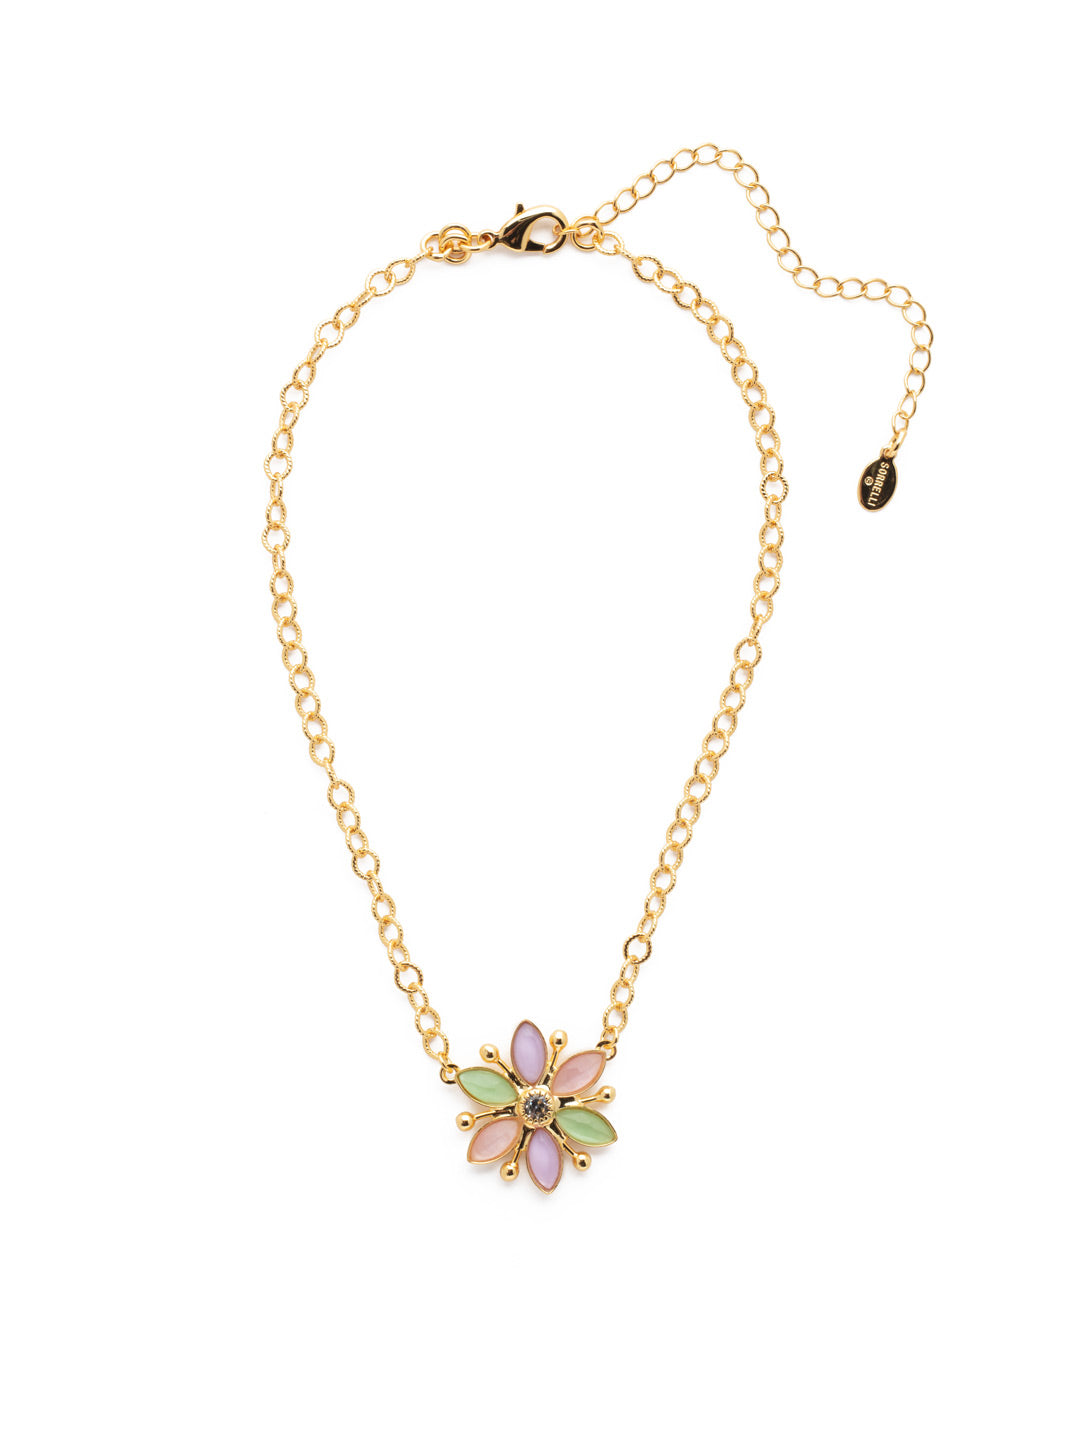 Phoebe Pendant Necklace - NEV90BGSPR - <p>Go airy and floral when you wear the Phoebe Pendant Necklace. Metallic linkwork gives way to a floral pendant crafted from sparkling navette crystals. From Sorrelli's Spring Rain collection in our Bright Gold-tone finish.</p>